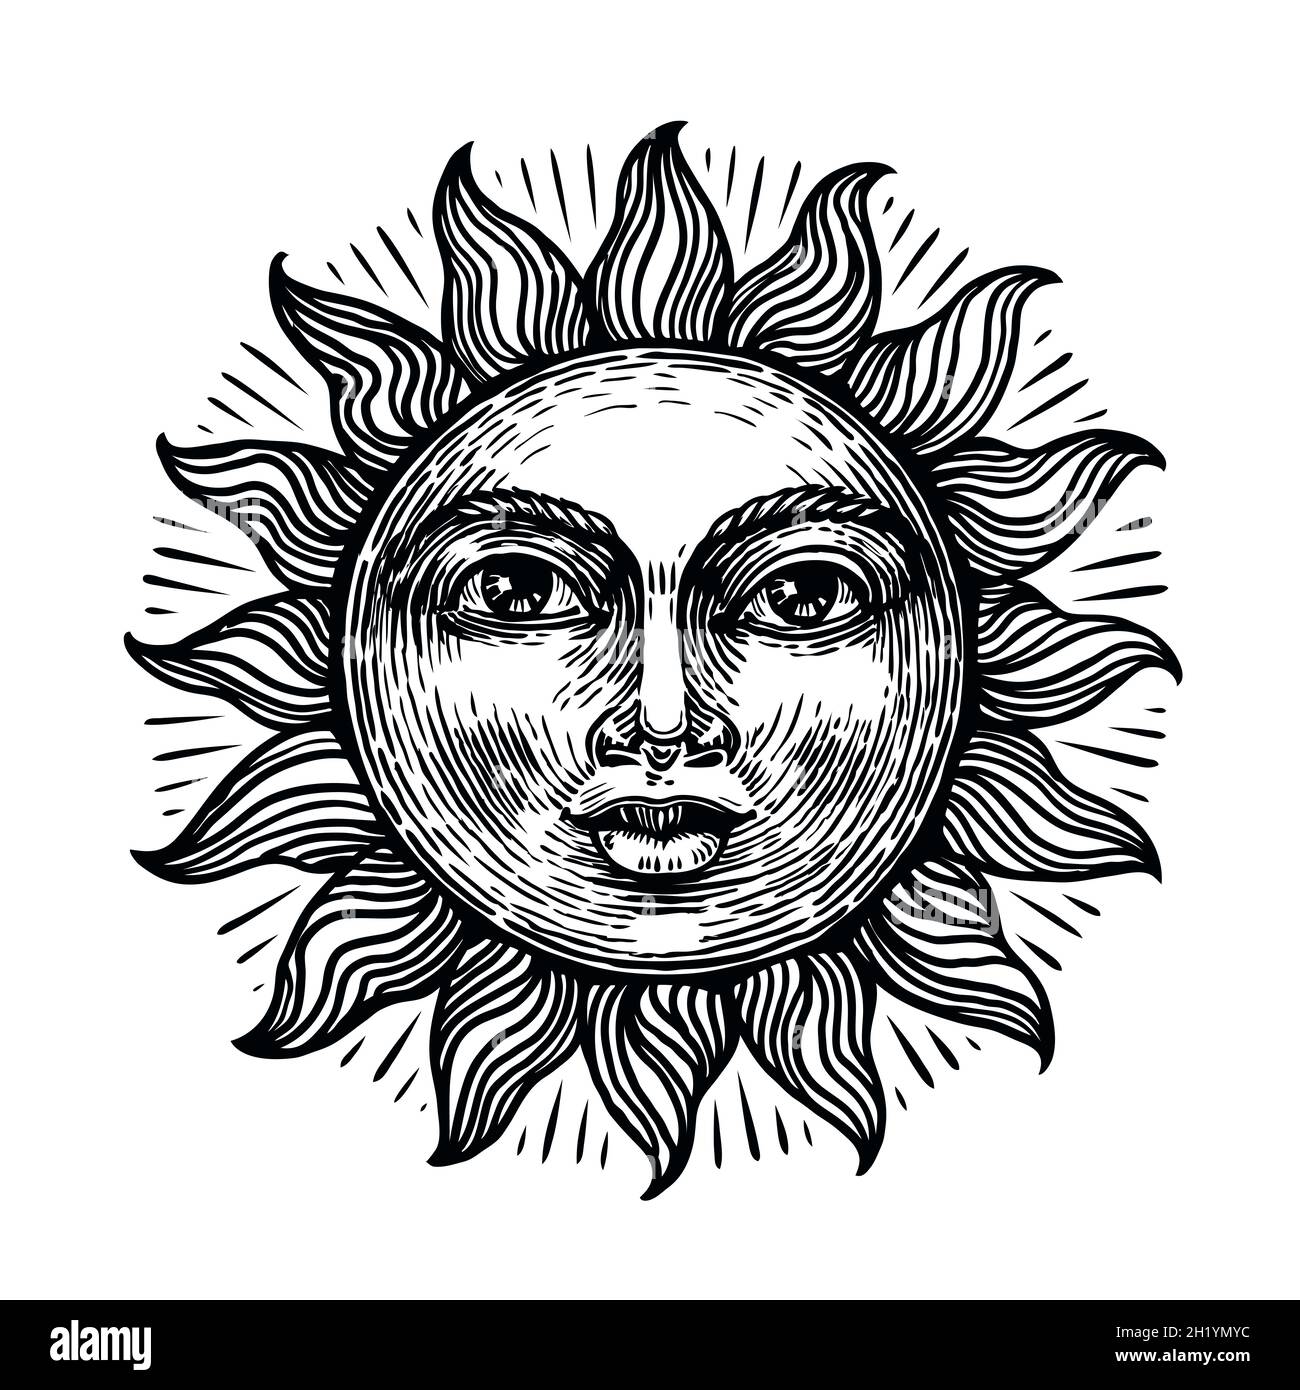 Hand drawn sun with face, decor element. Astrology symbol in vintage engraving style isolated on white background Stock Photo